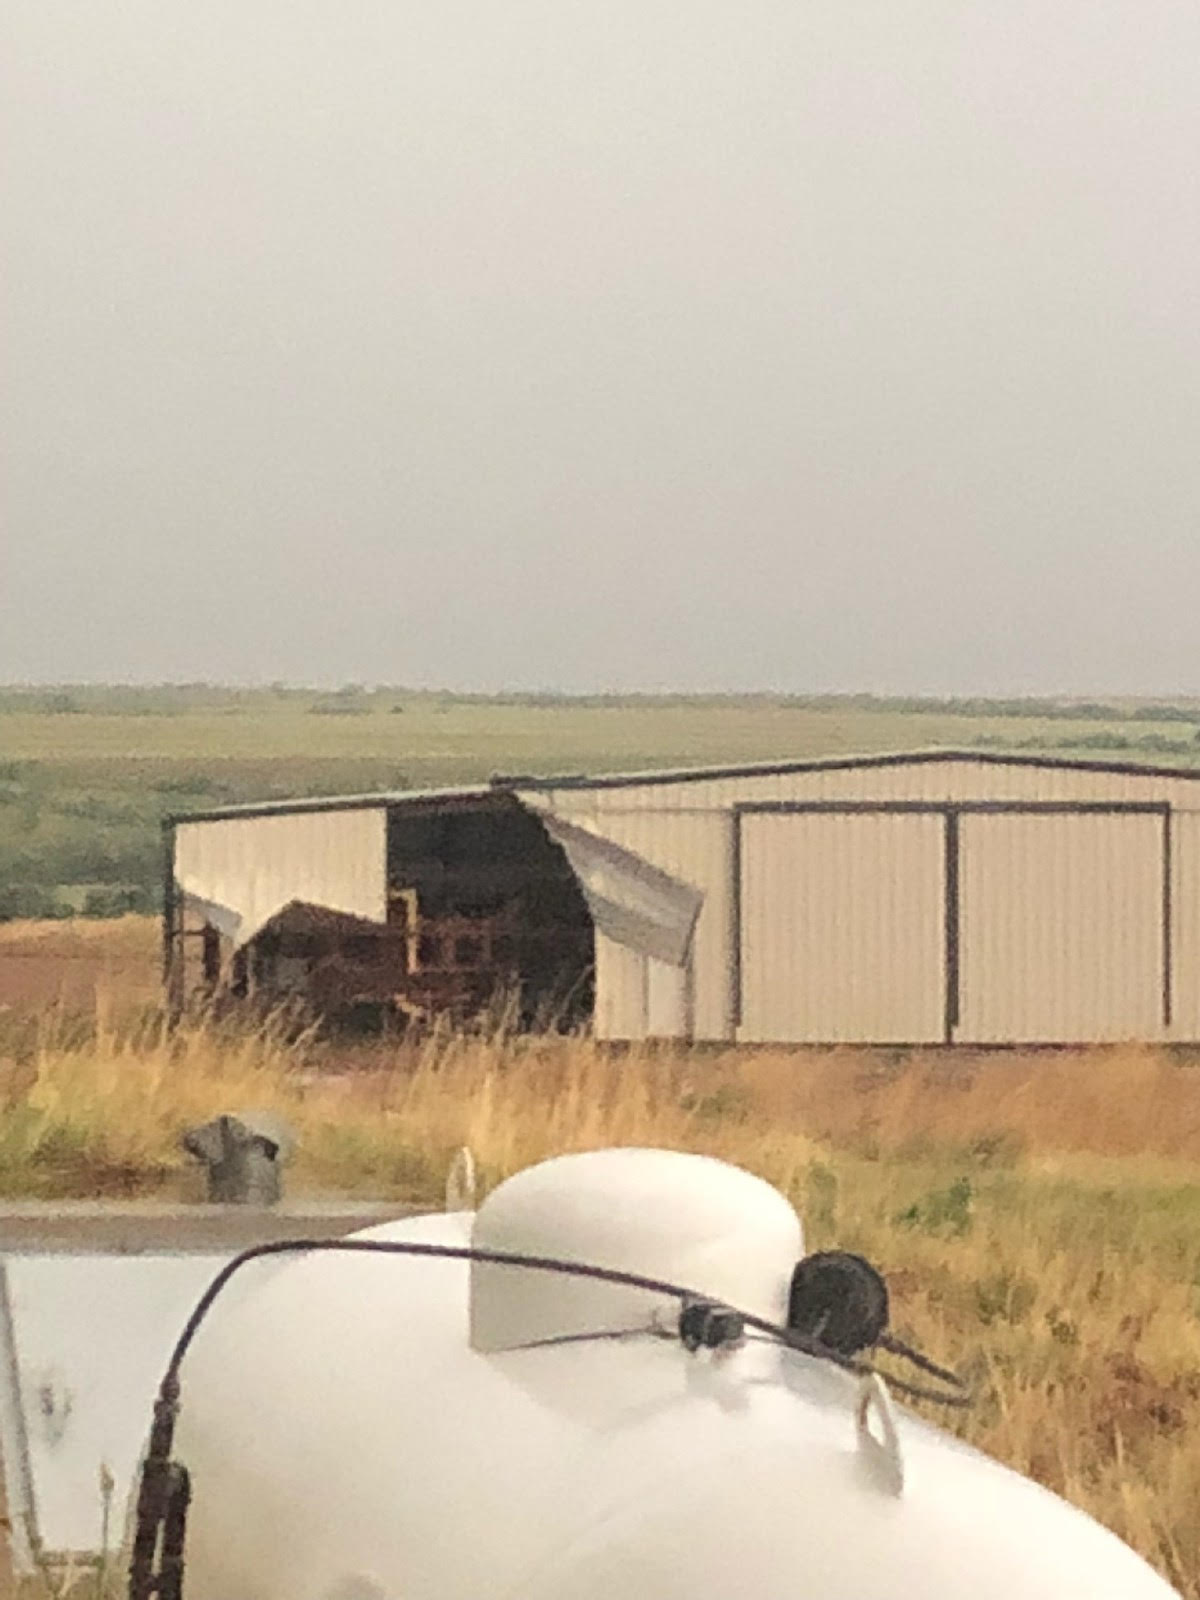 Damage sustained from large hail and strong winds near Estelline on 13 May 2018. The picture is courtesy of Farrah Holcomb.